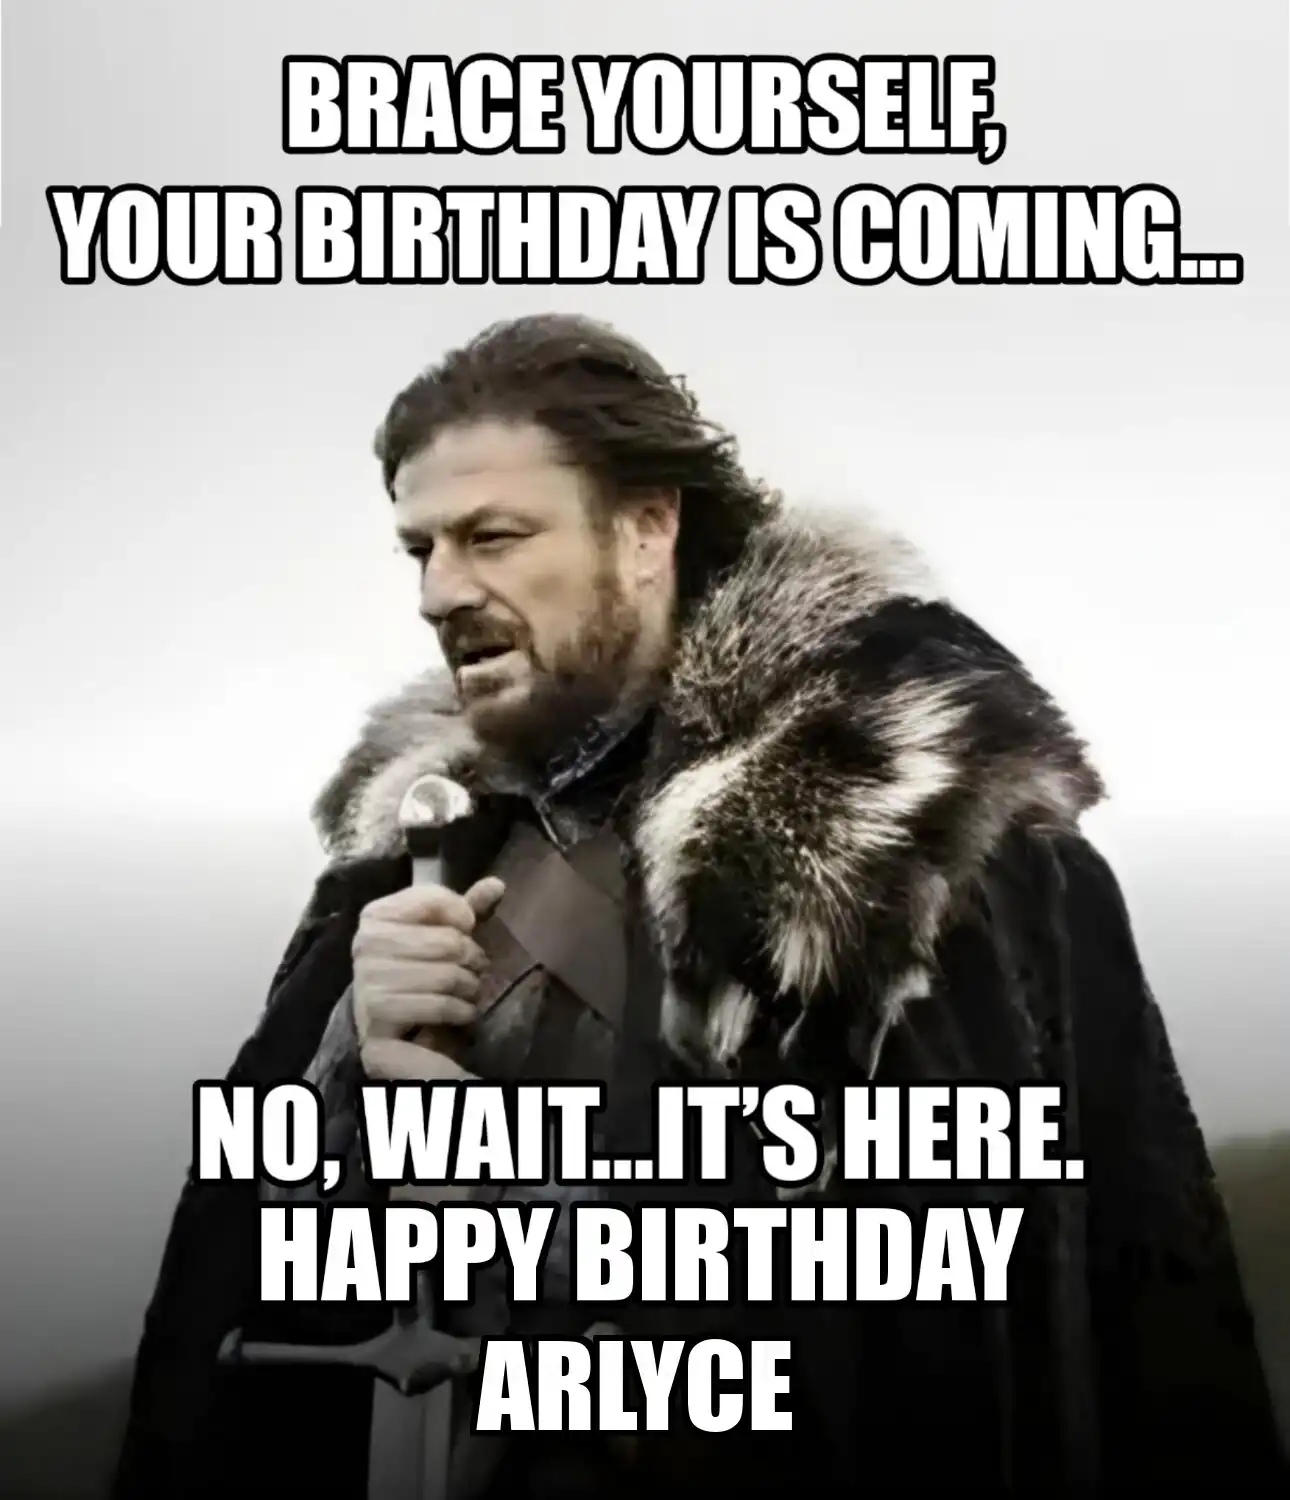 Happy Birthday Arlyce Brace Yourself Your Birthday Is Coming Meme